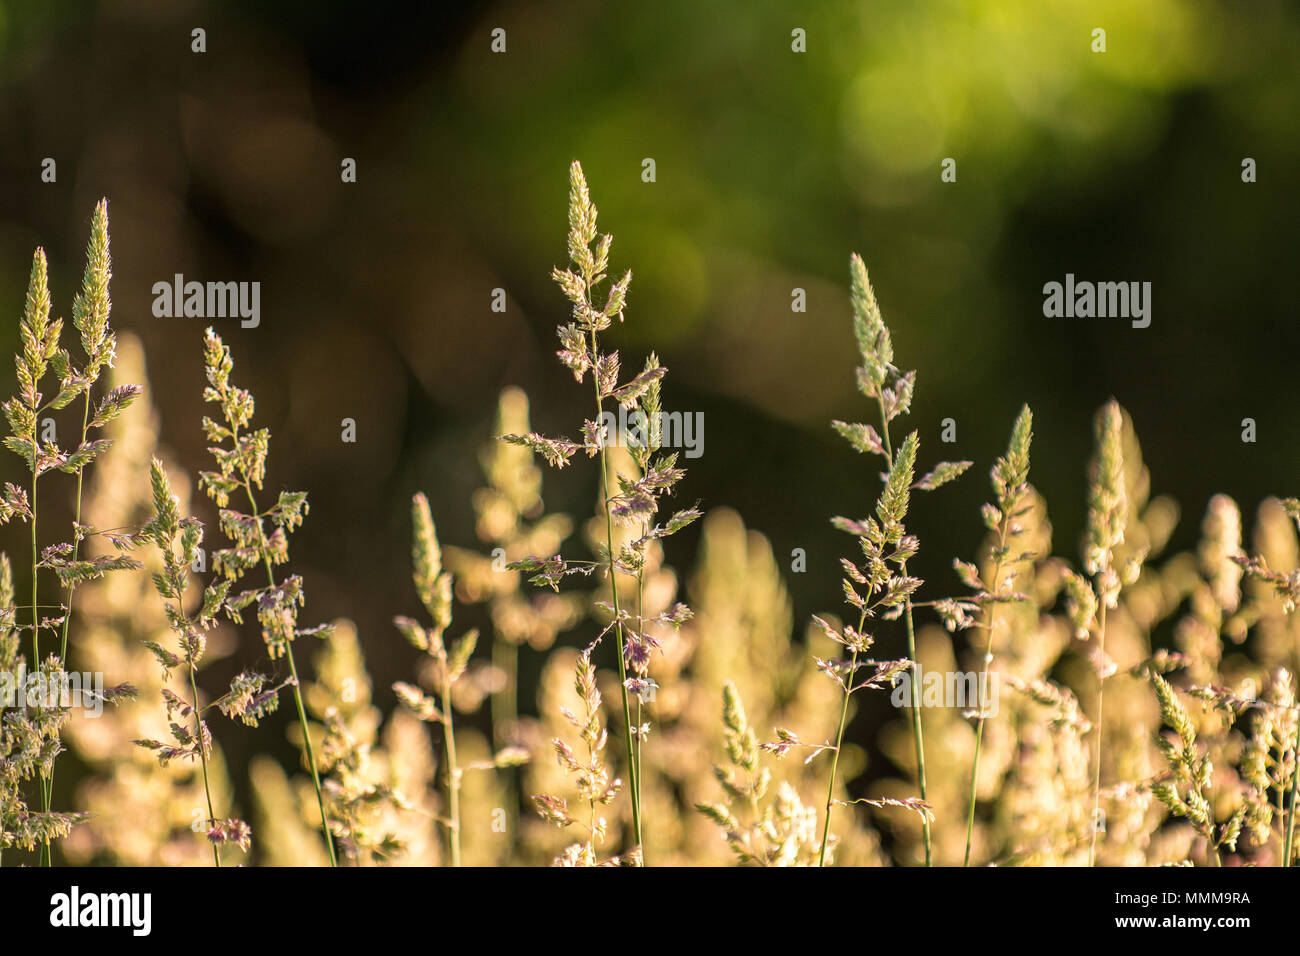 Close up photo of prairie grass in bloom in summer with a shallow depth of field. Stock Photo